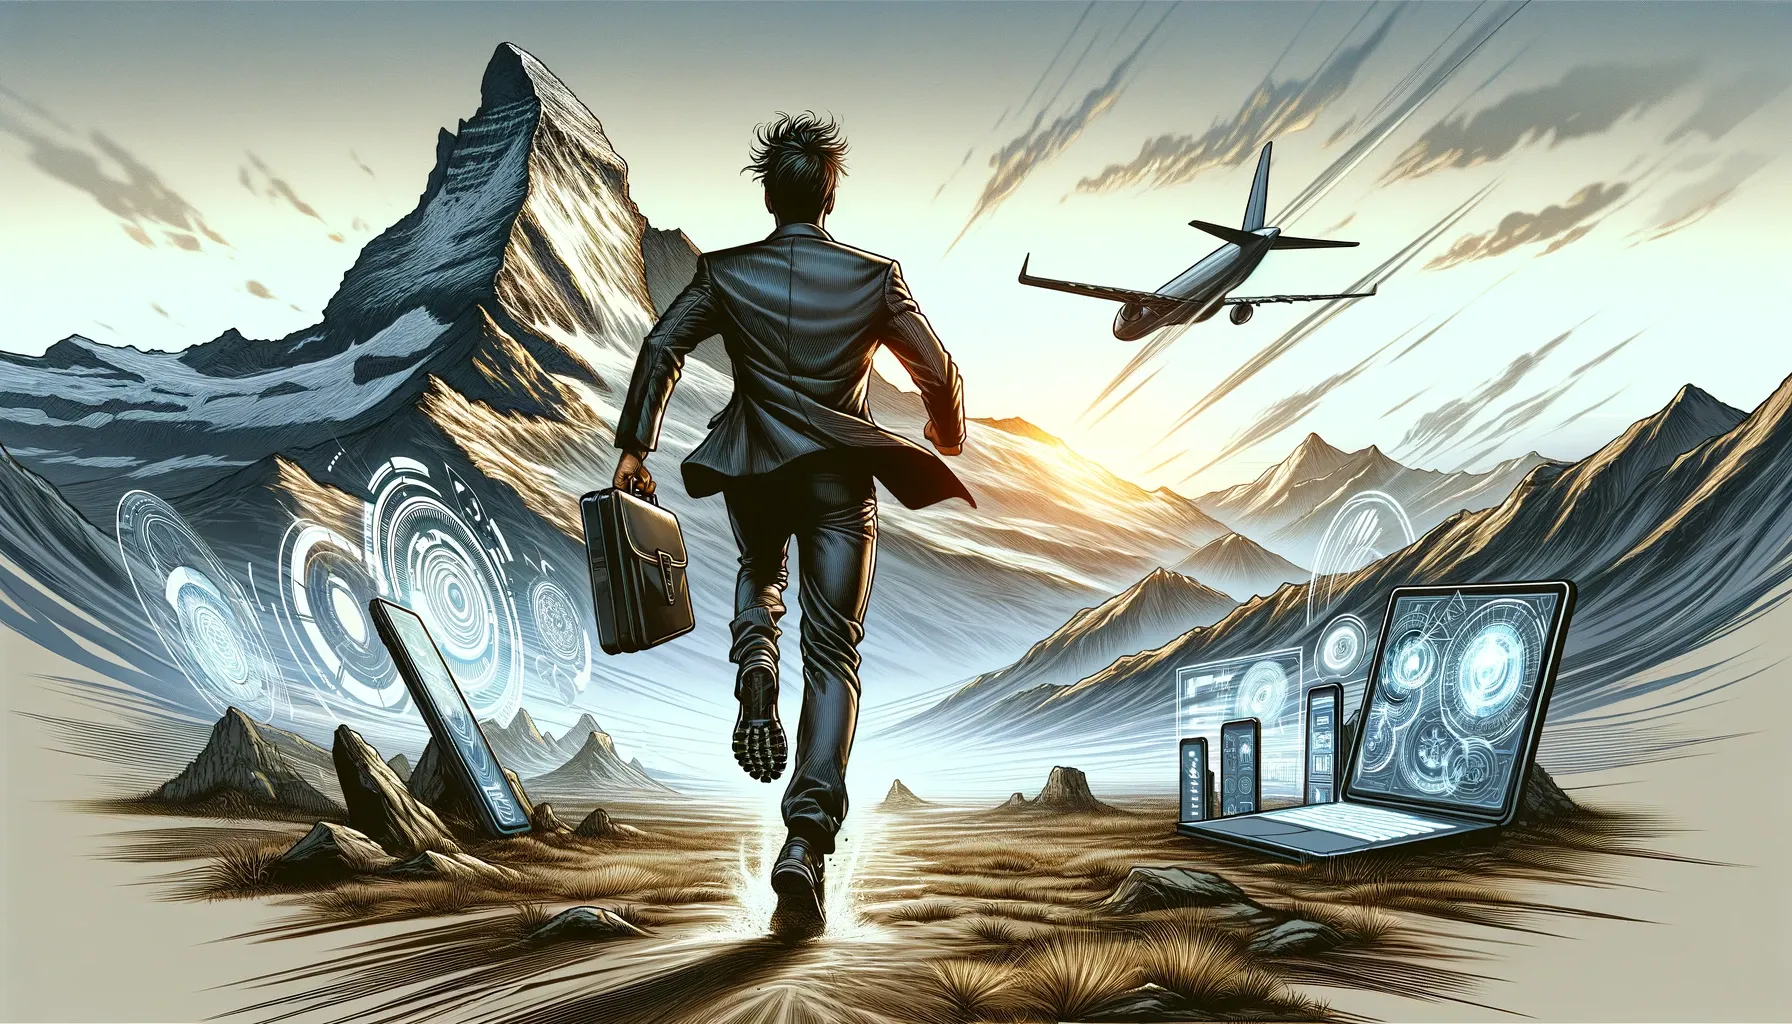 Entrepreneur running towards a mountain with technological gadgets in the wilderness.